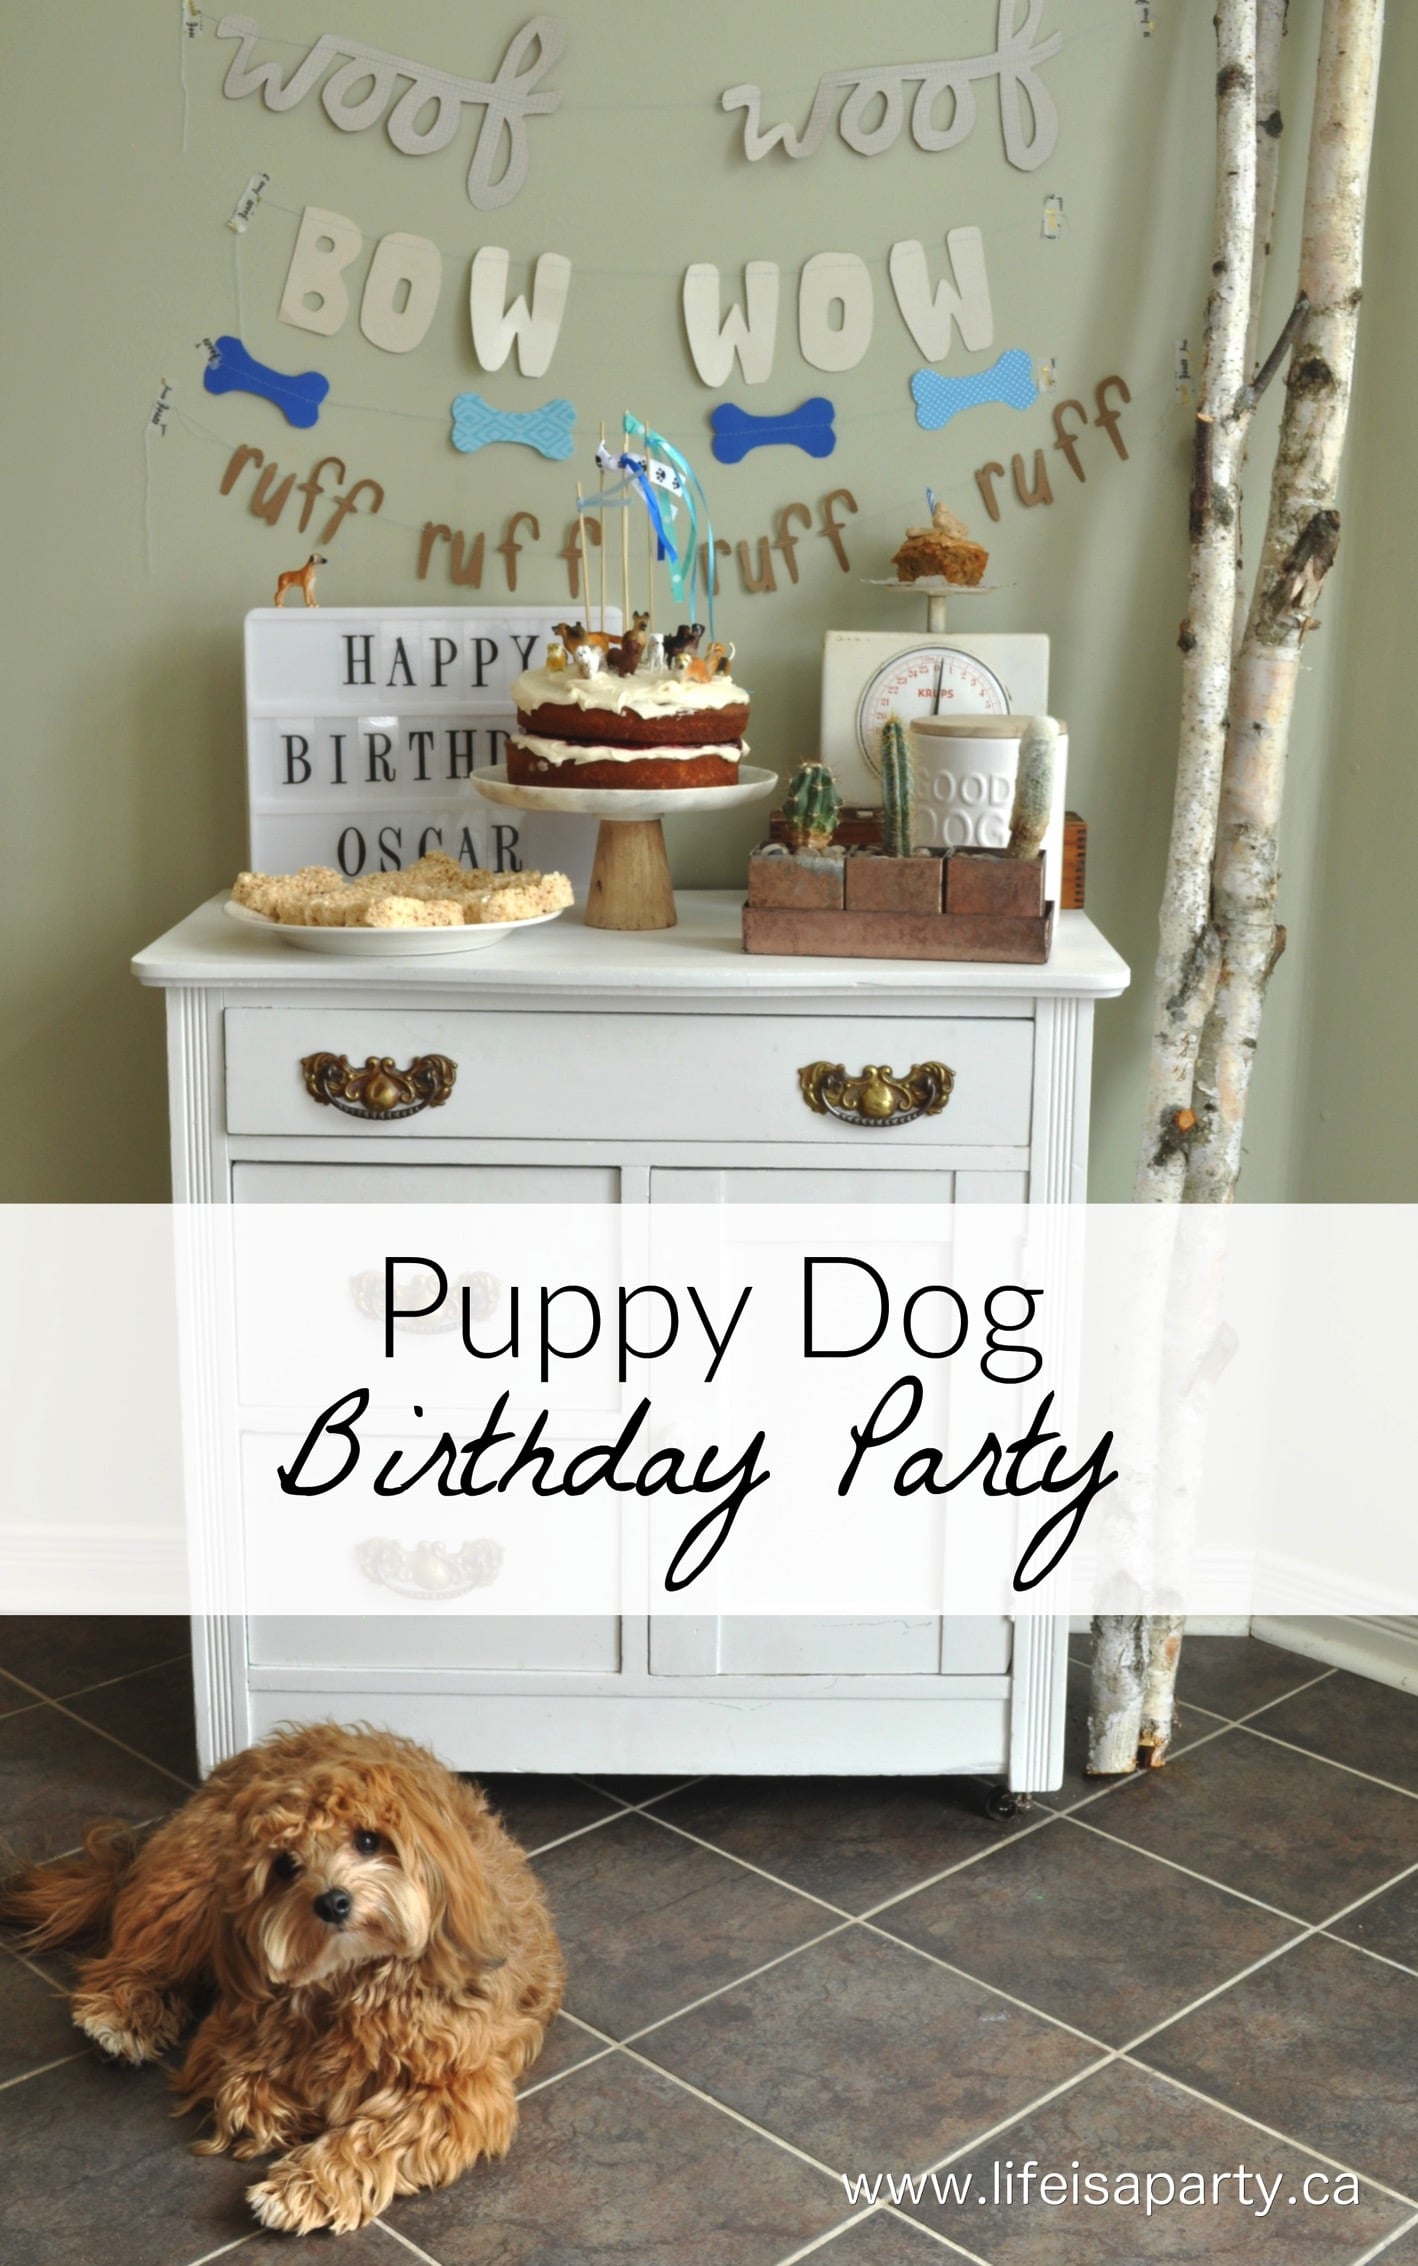 Puppy Dog Birthday Party: easy ideas for a dog cake for humans, and a real dog, along with inexpensive dog themed decorations, and dessert table.